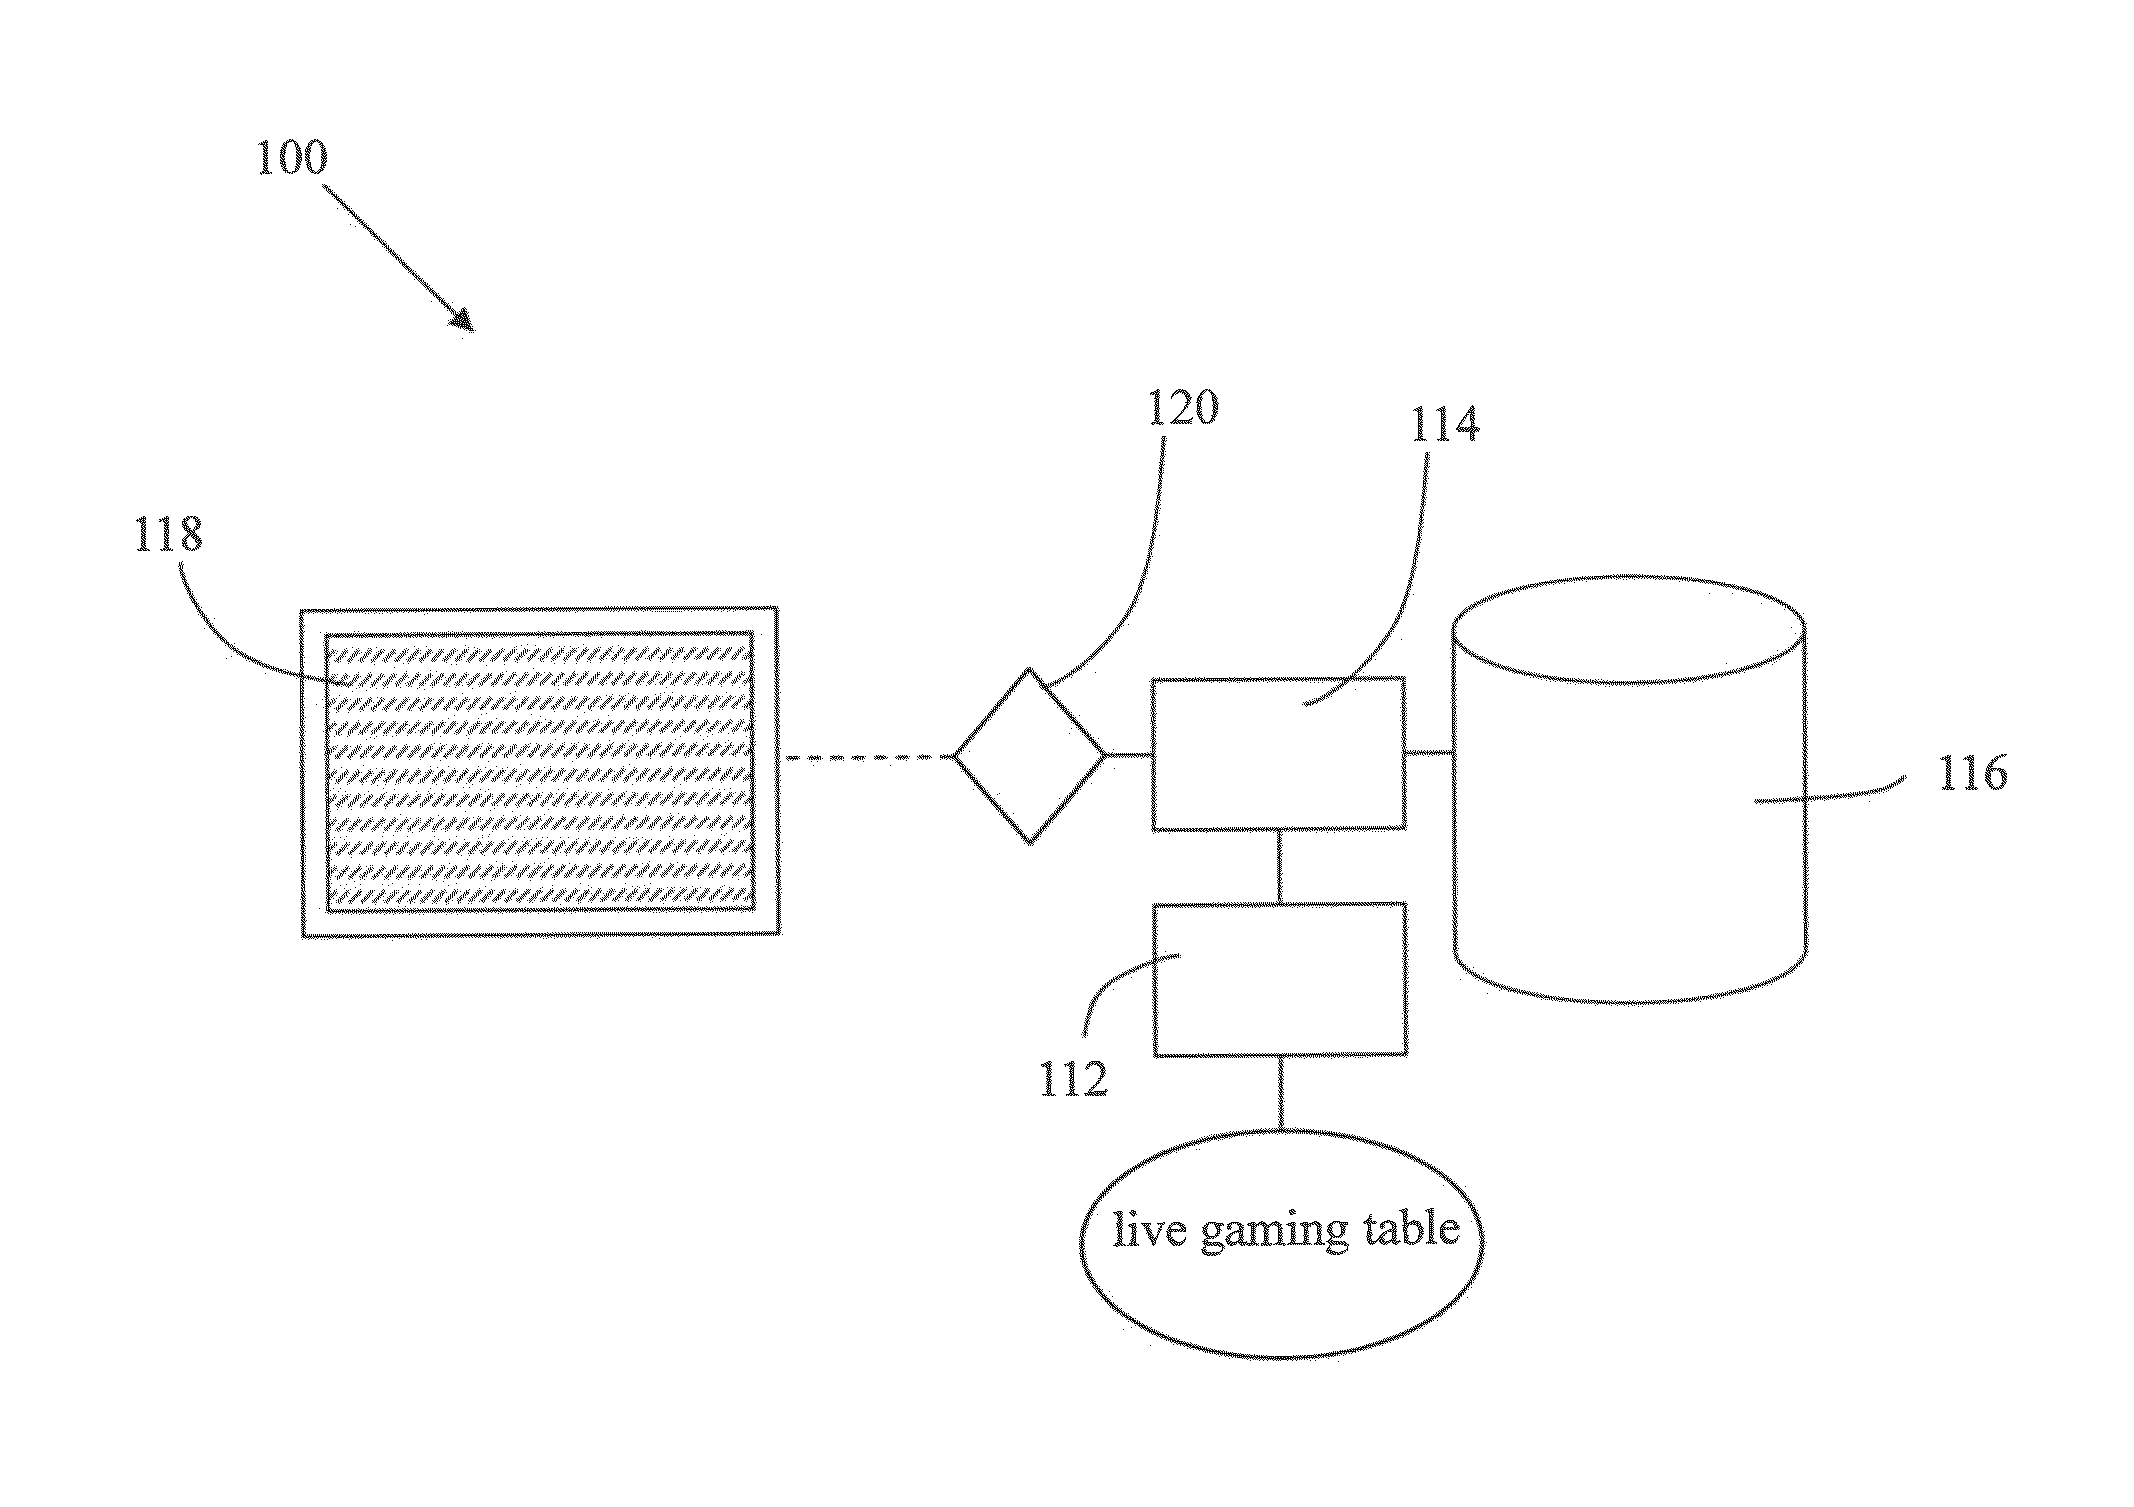 System and method for providing remote gaming featuring live gaming data